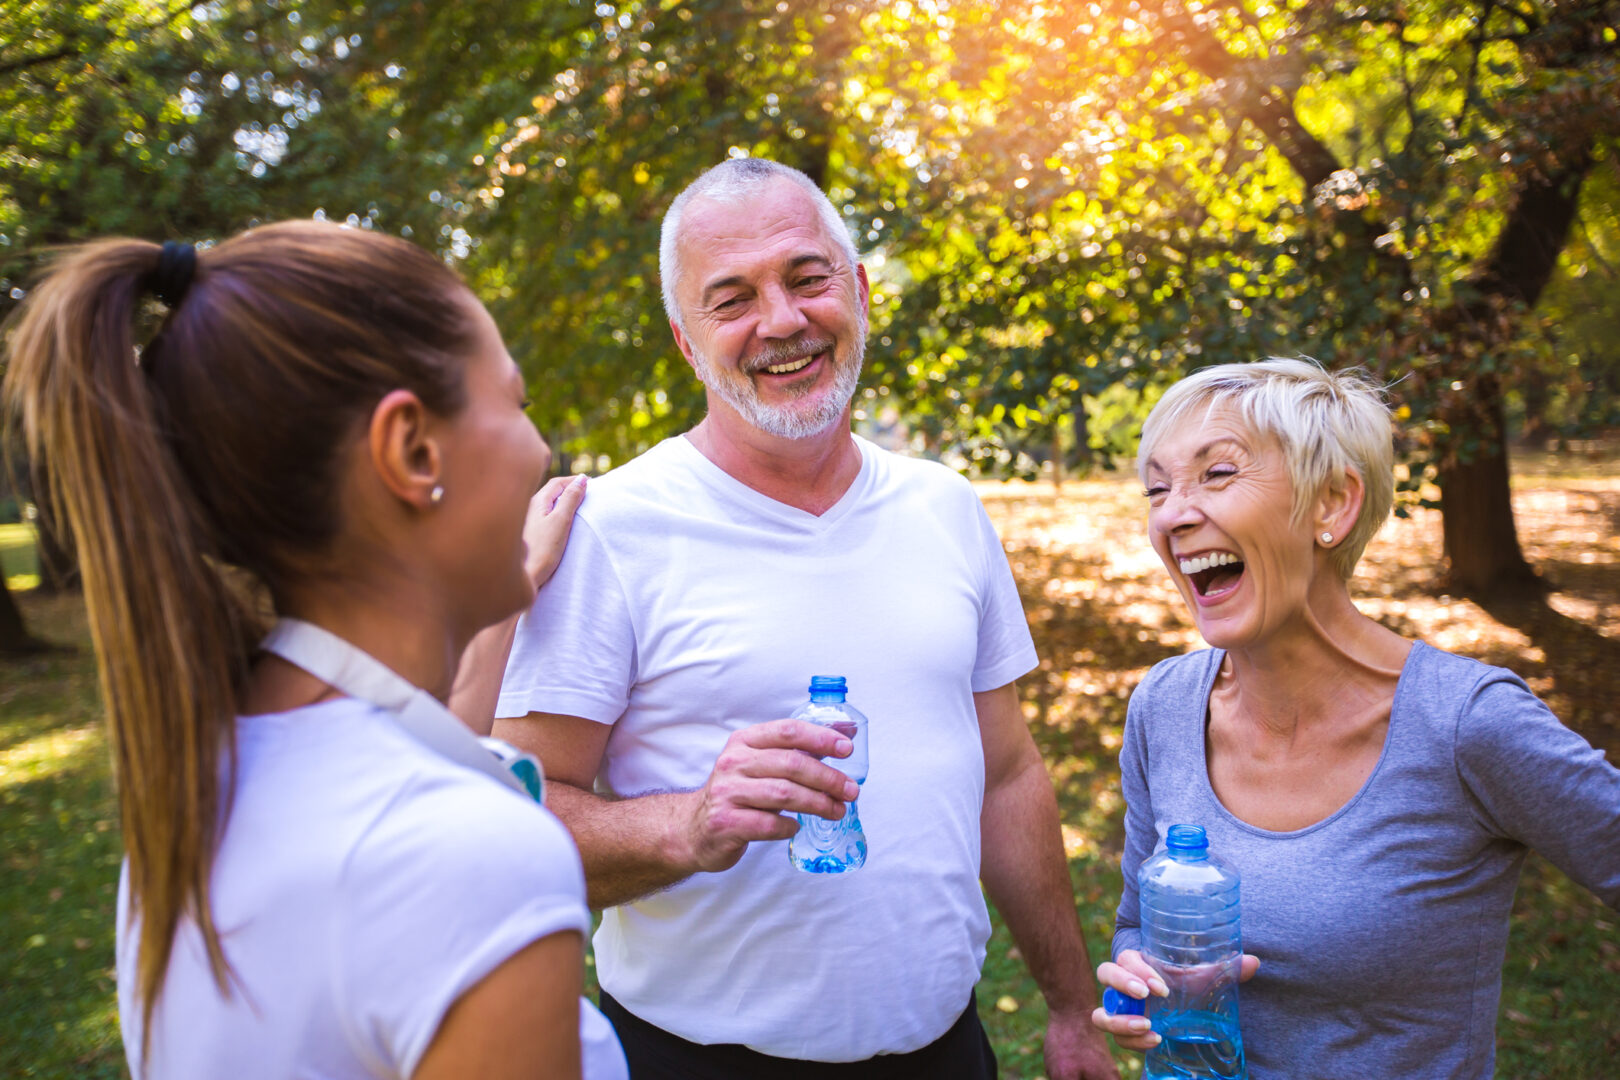 Three people laughing and drinking water in a park.